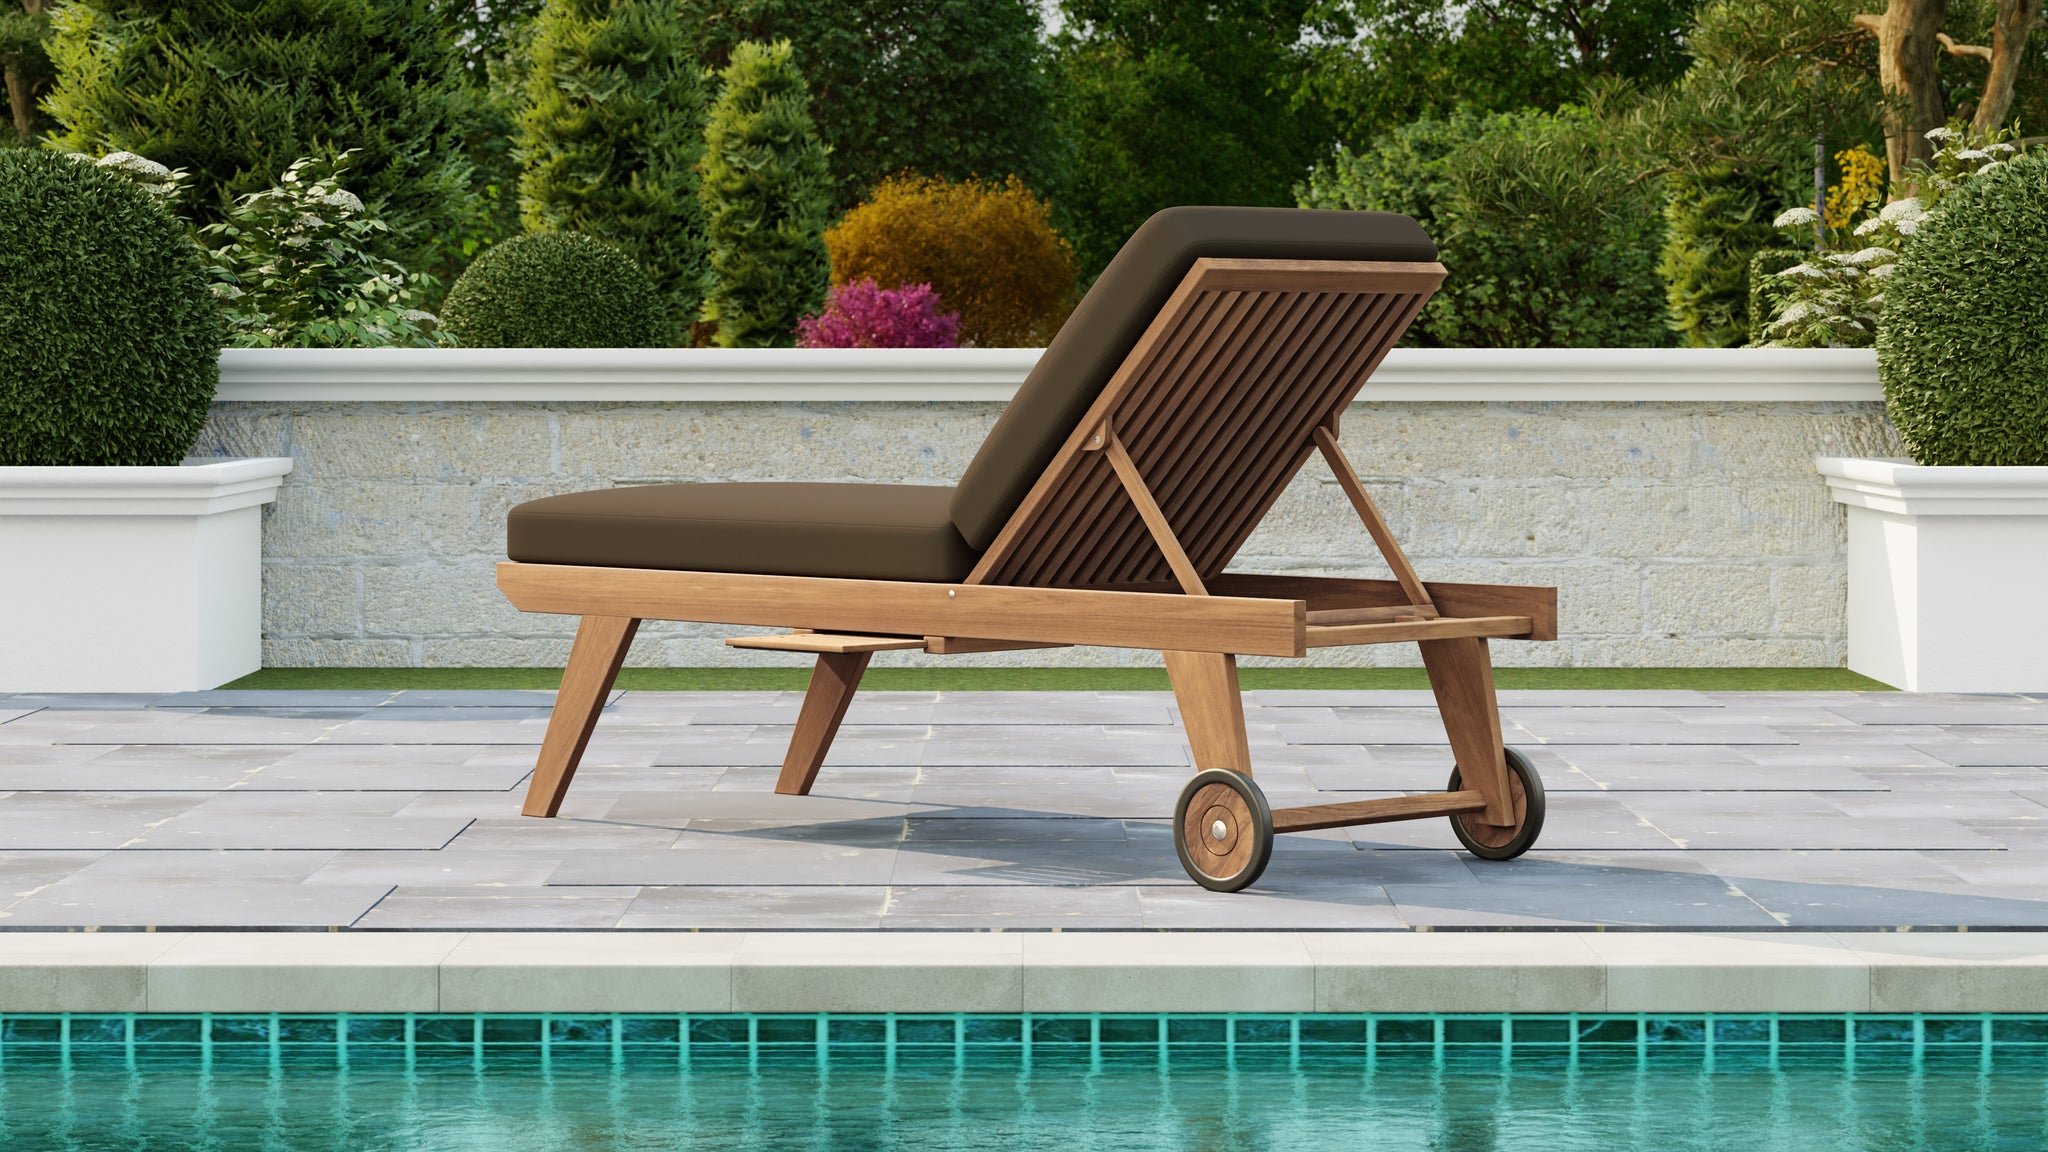 High Level Sunlounger Rear & Side View